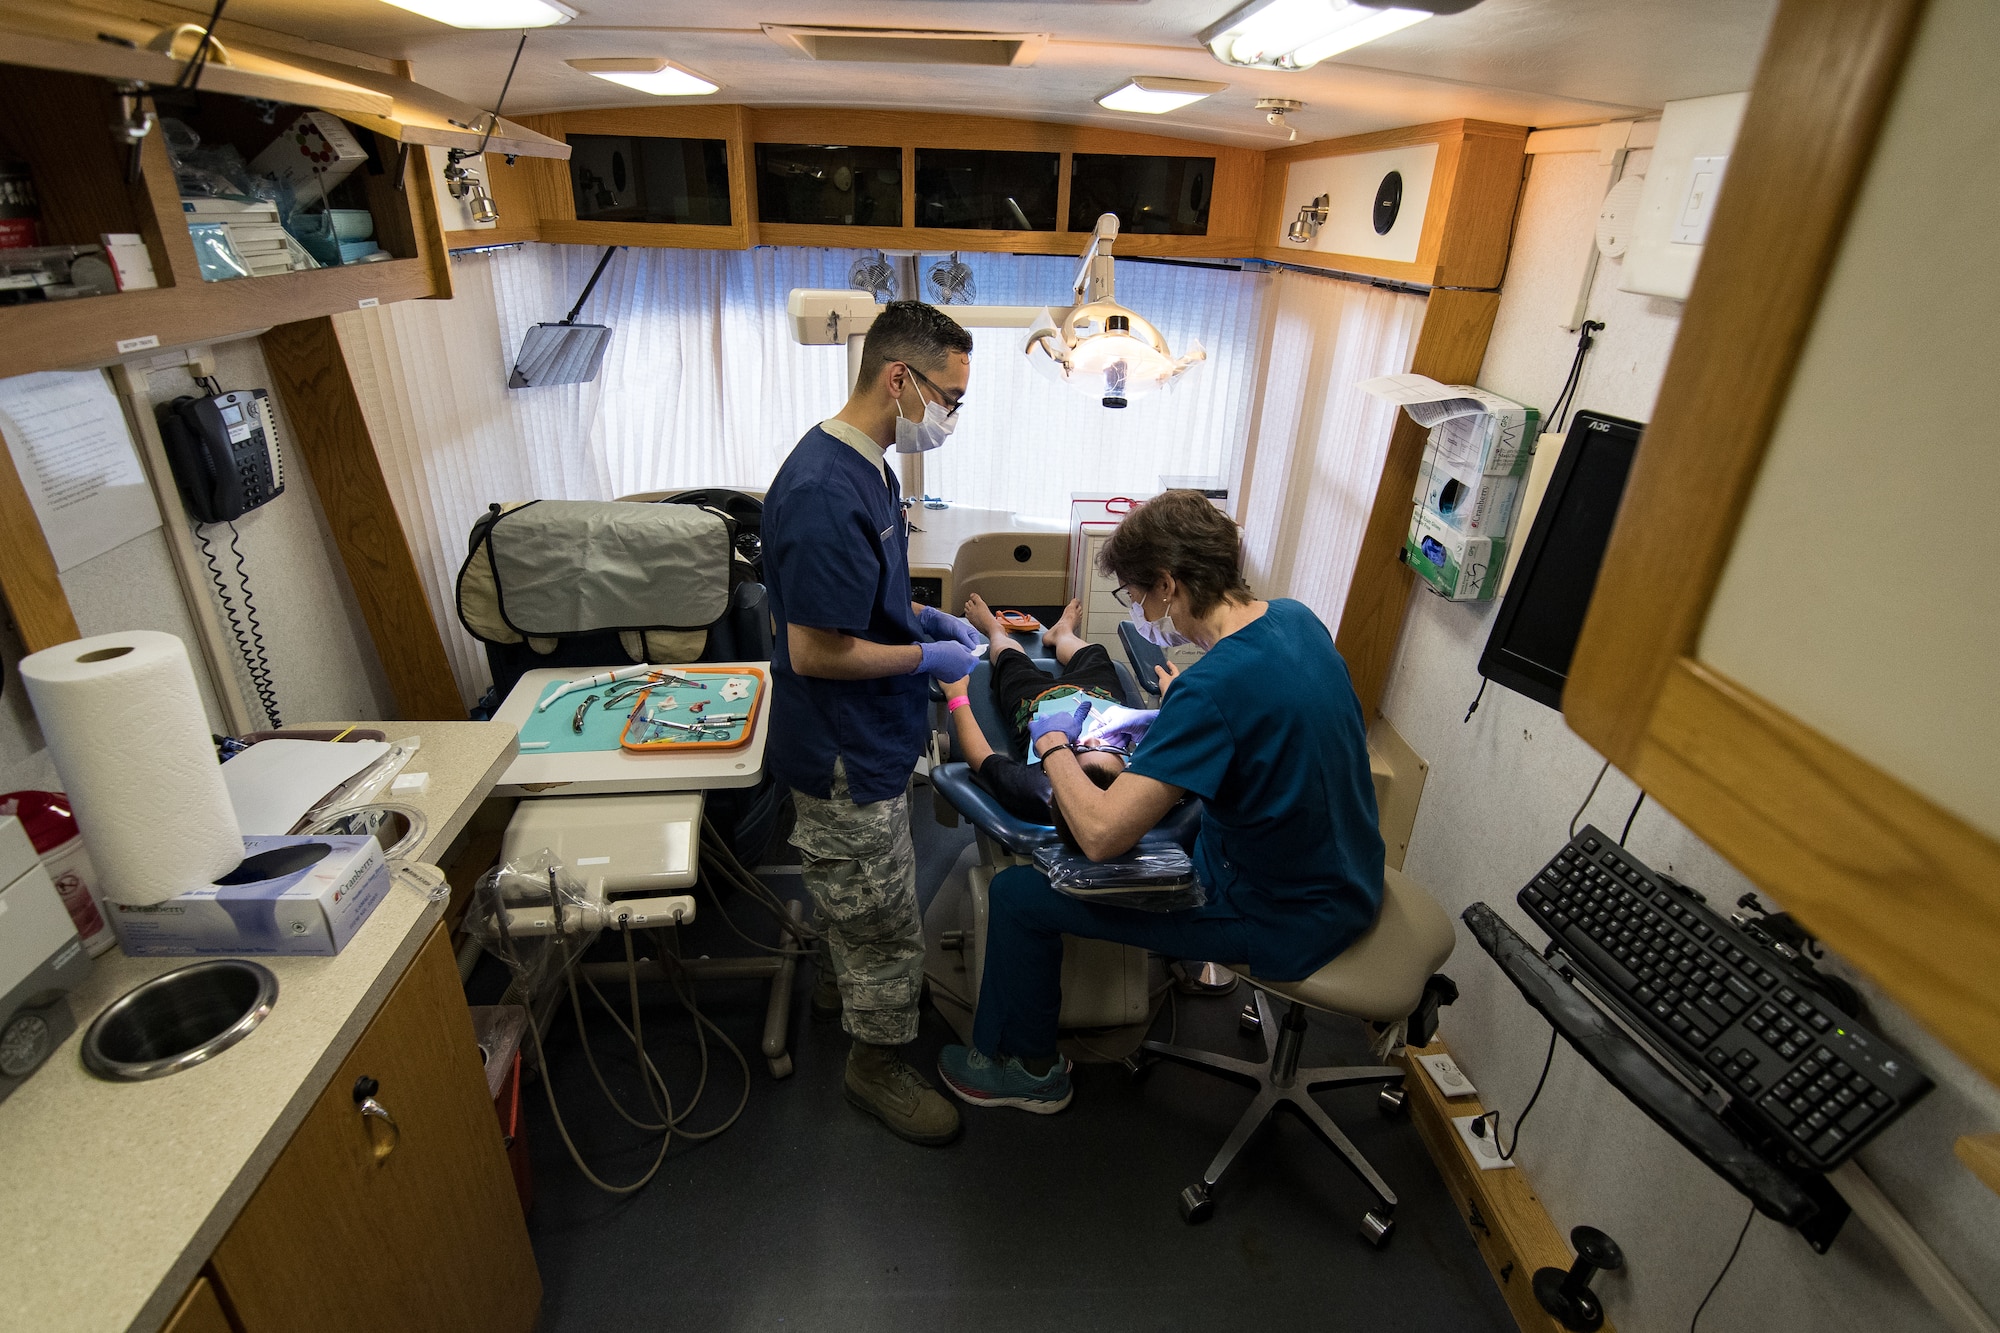 U.S. Air Force Tech Sgt. Eddie Perez, a dental technician, and Lt. Col. Julie Robinson, the dental officer-in-charge for Delta Area Economic Opportunity Corporation Tri-State Innovative Readiness Training 2019 and a dentist, both assigned to the 176th Wing, Alaska Air National Guard, perform a tooth extraction procedure at a temporary clinic in Sikeston, Missouri, June 19, 2019. Perez and Robinson deployed to Sikeston as part of a joint service medical exercise that provides training to service members and no-cost medical services to the community. (U.S. Air National Guard photo by Senior Airman Jonathan W. Padish)